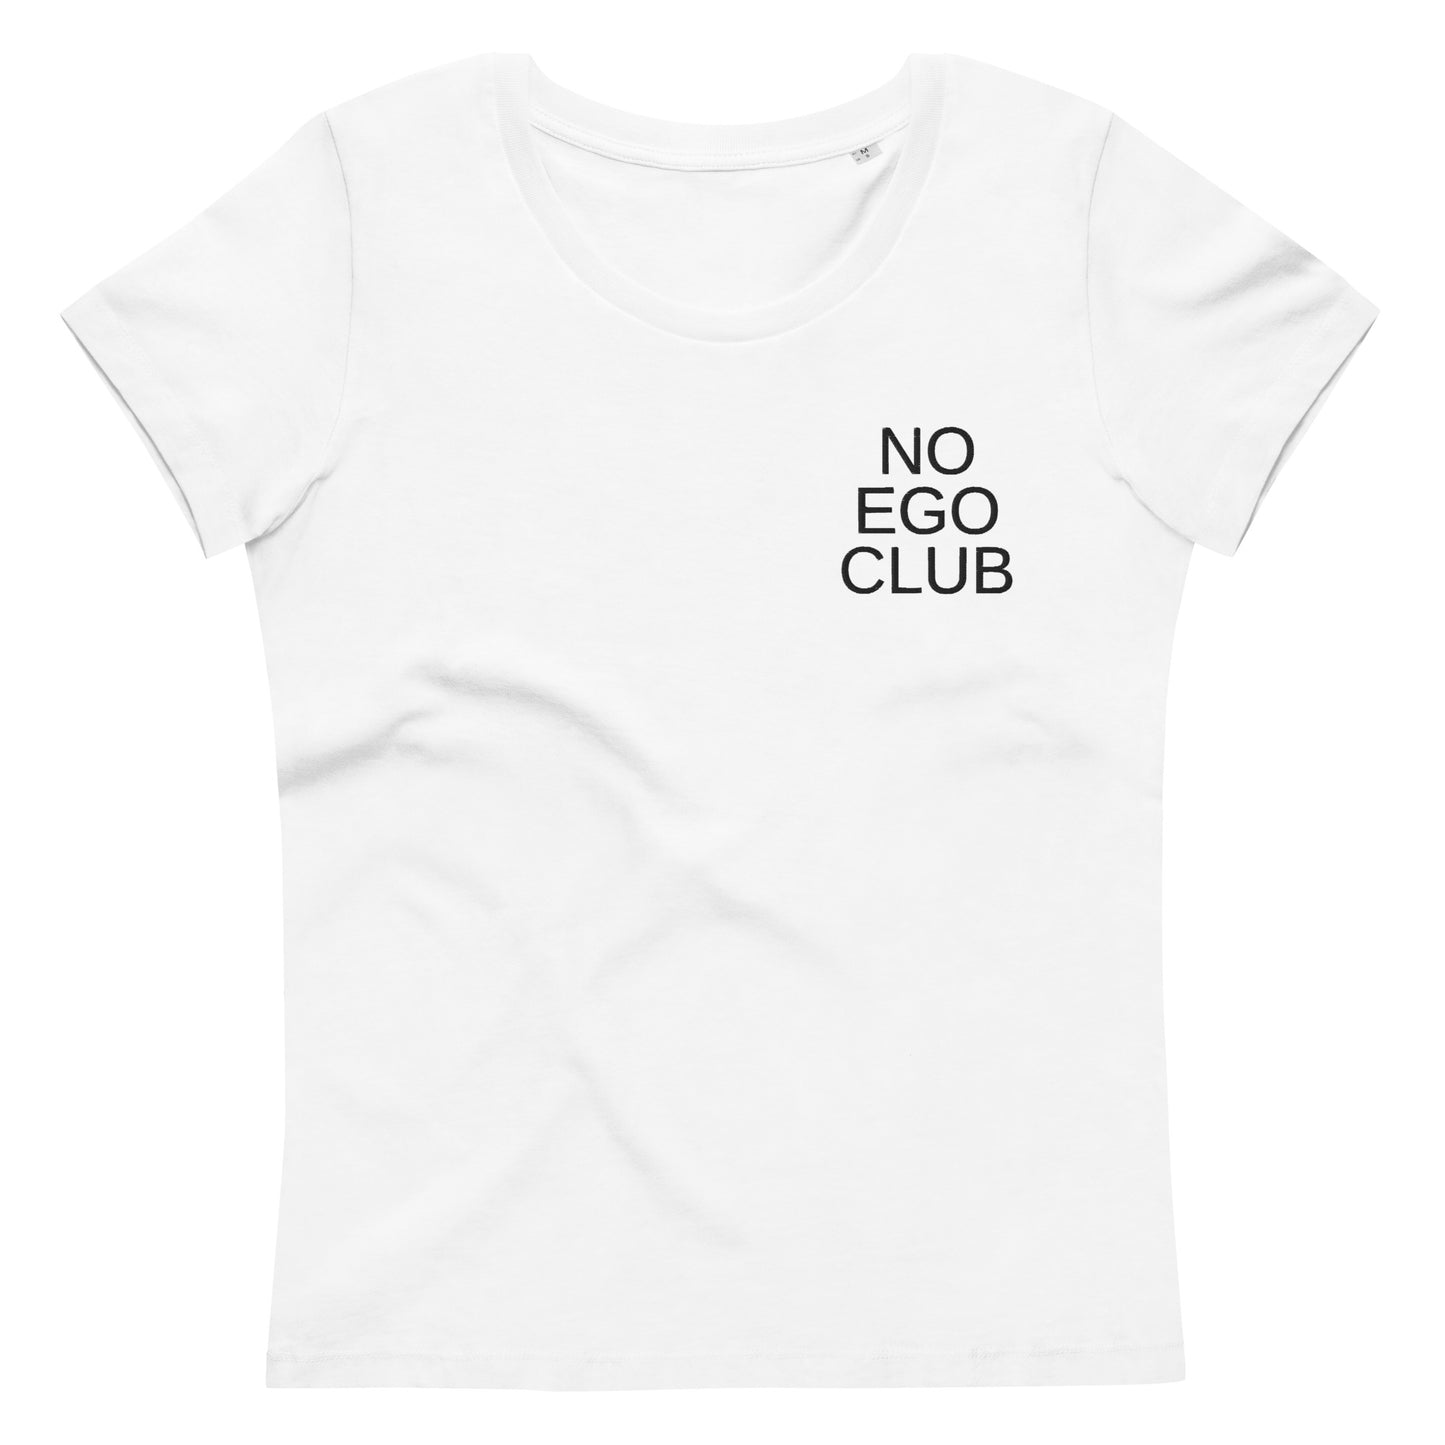 No Ego Club t-shirt white and women. Clothes With Words apparel.